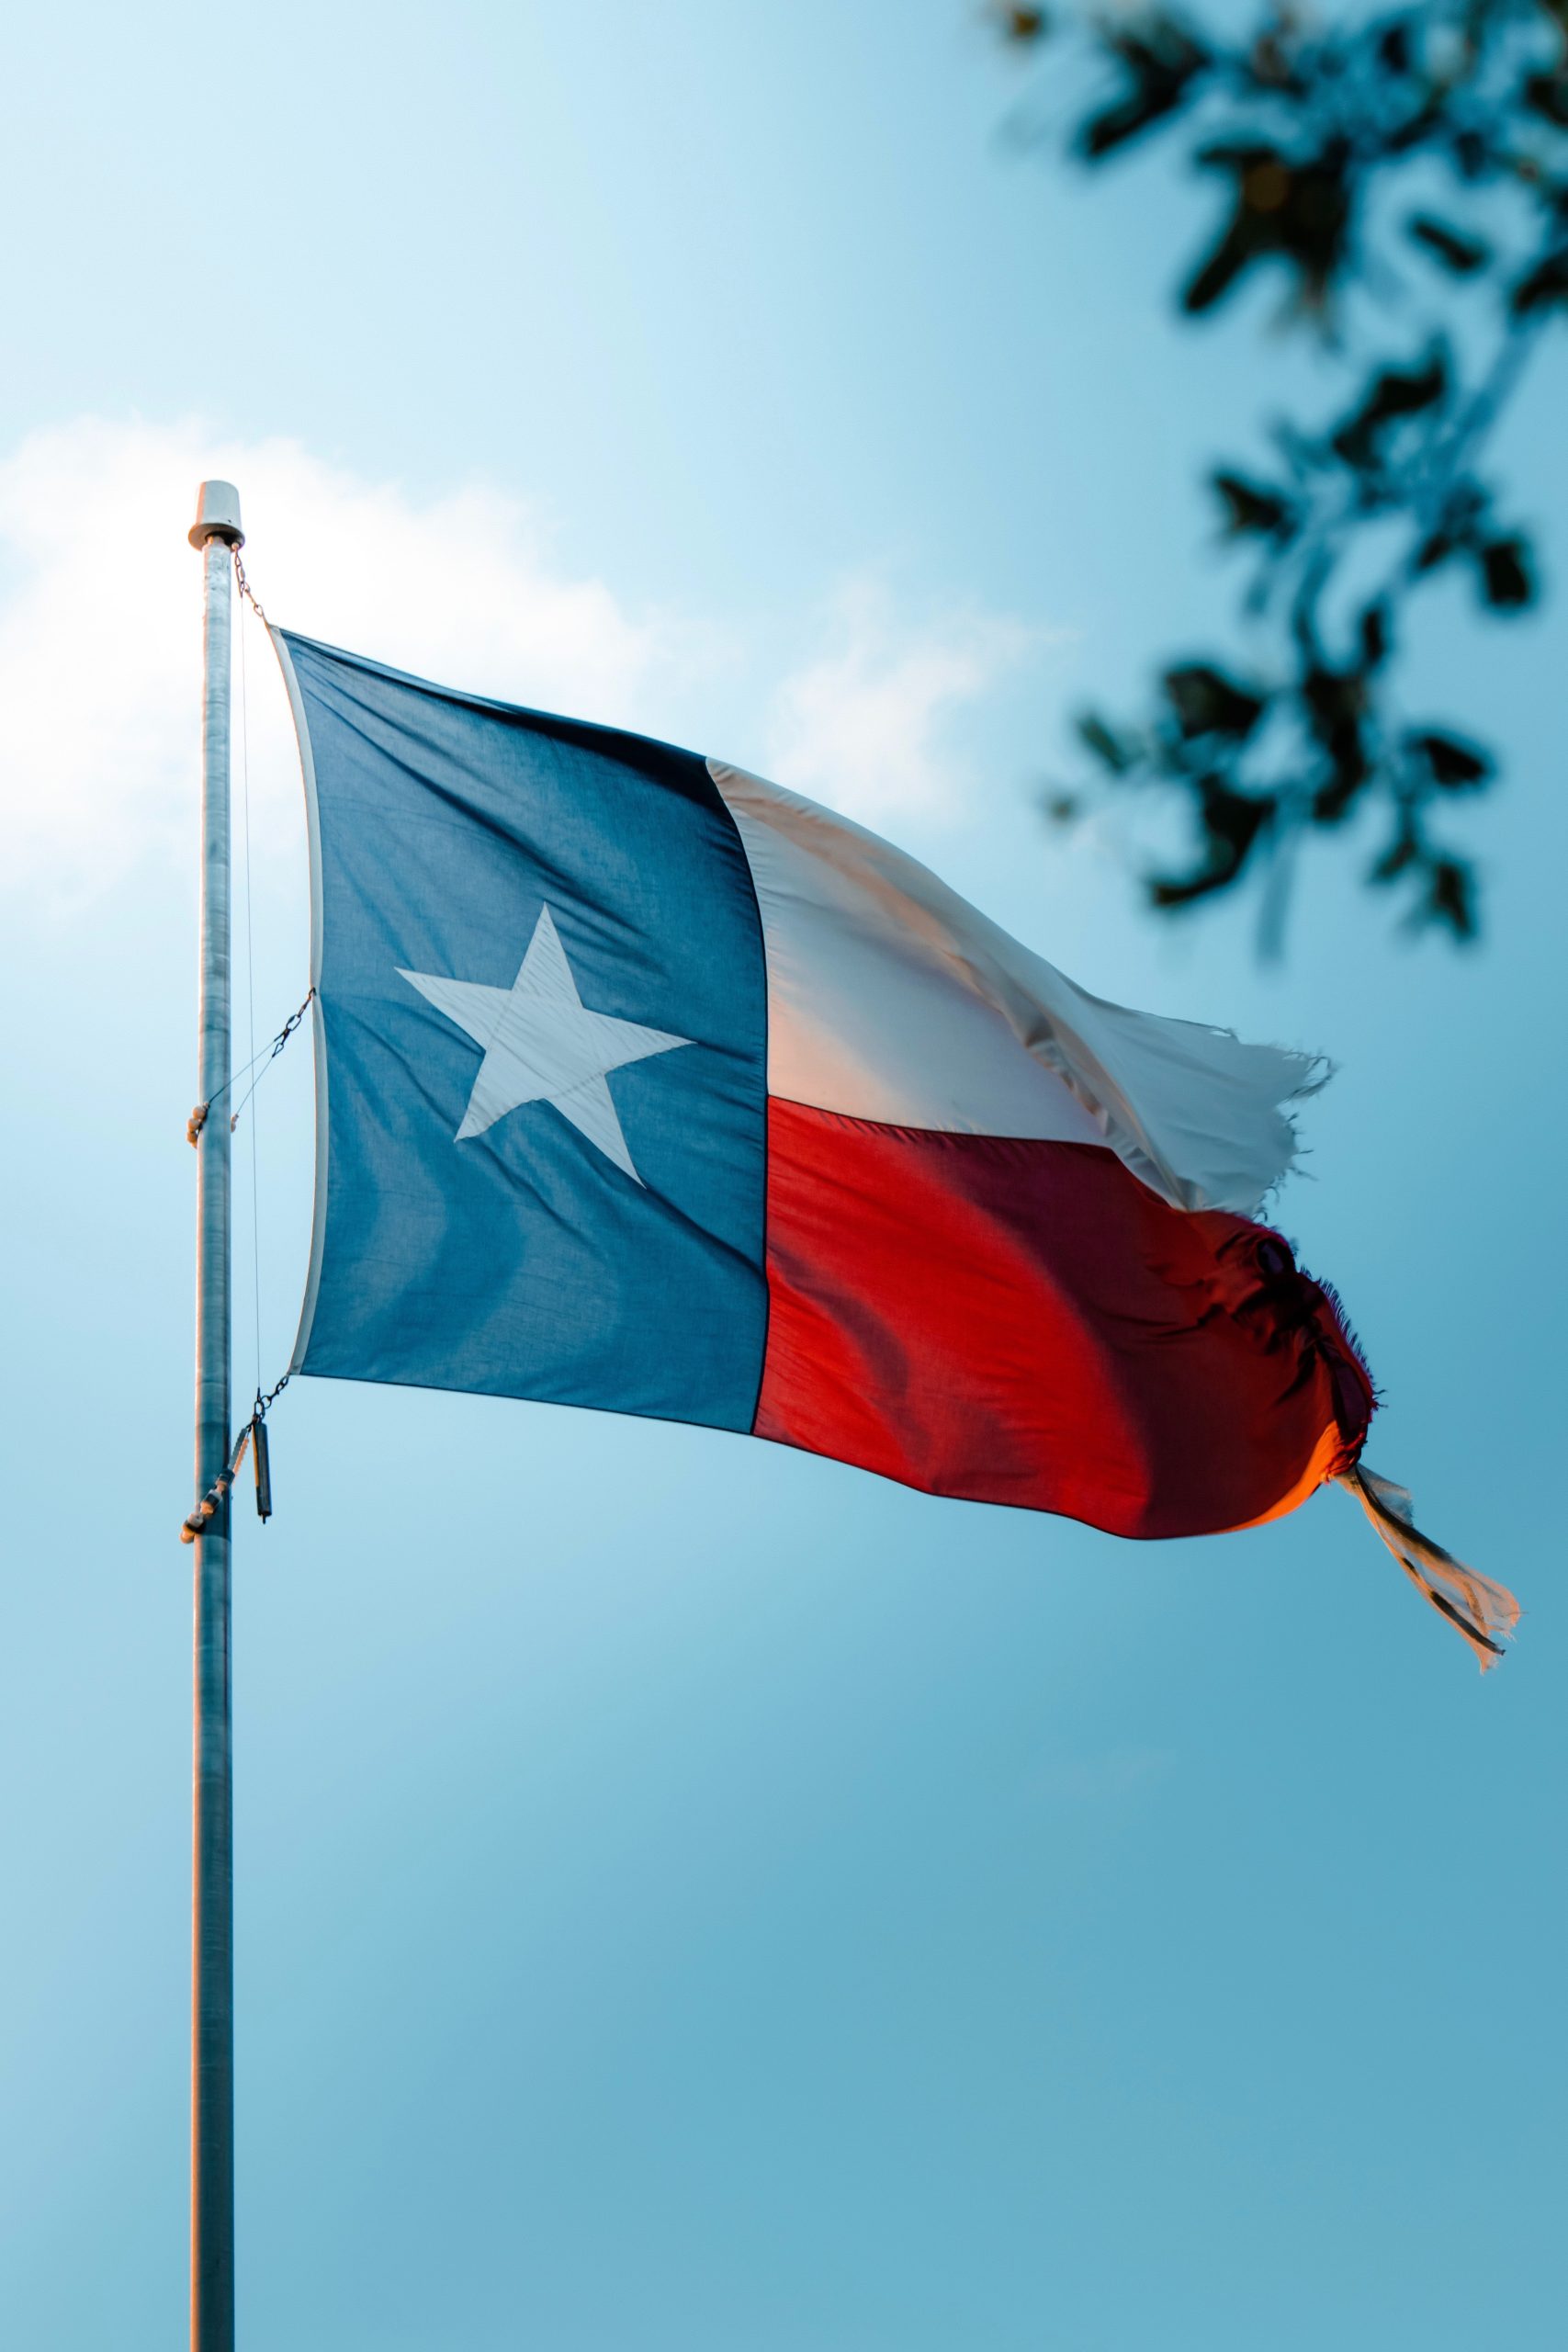 A texas flag flying outdoors, a blue sky in the background